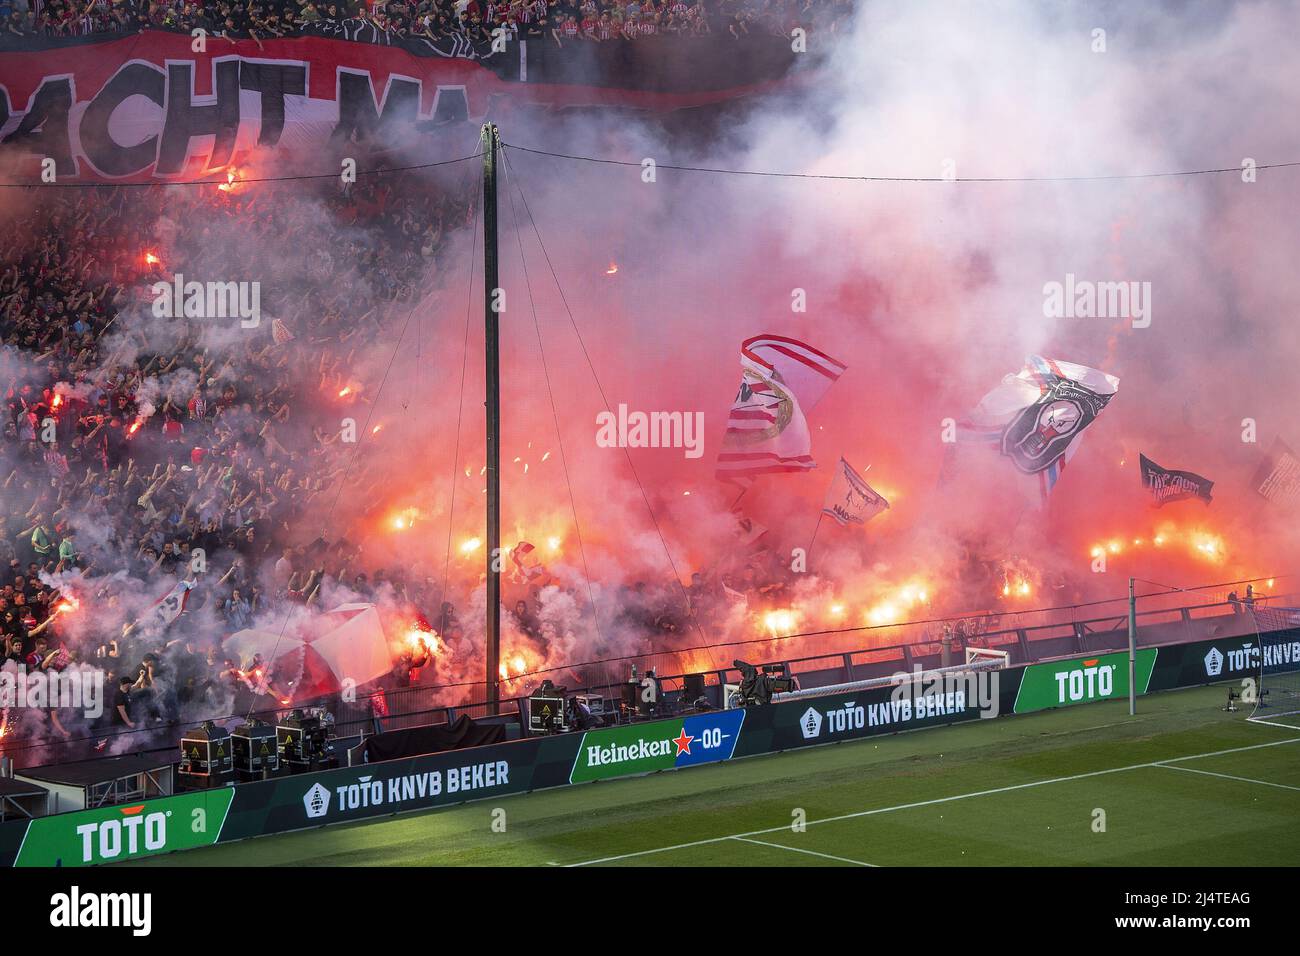 Moment aardappel Monumentaal ROTTERDAM, 17-04-2022, Stadion De Kuip, Dutch TOTO KNVB Beker finale  Football, season 2021 / 2022, between PSV - Ajax final result 2-1, fans of  PSV create atmosphere with torches, smoke and flags